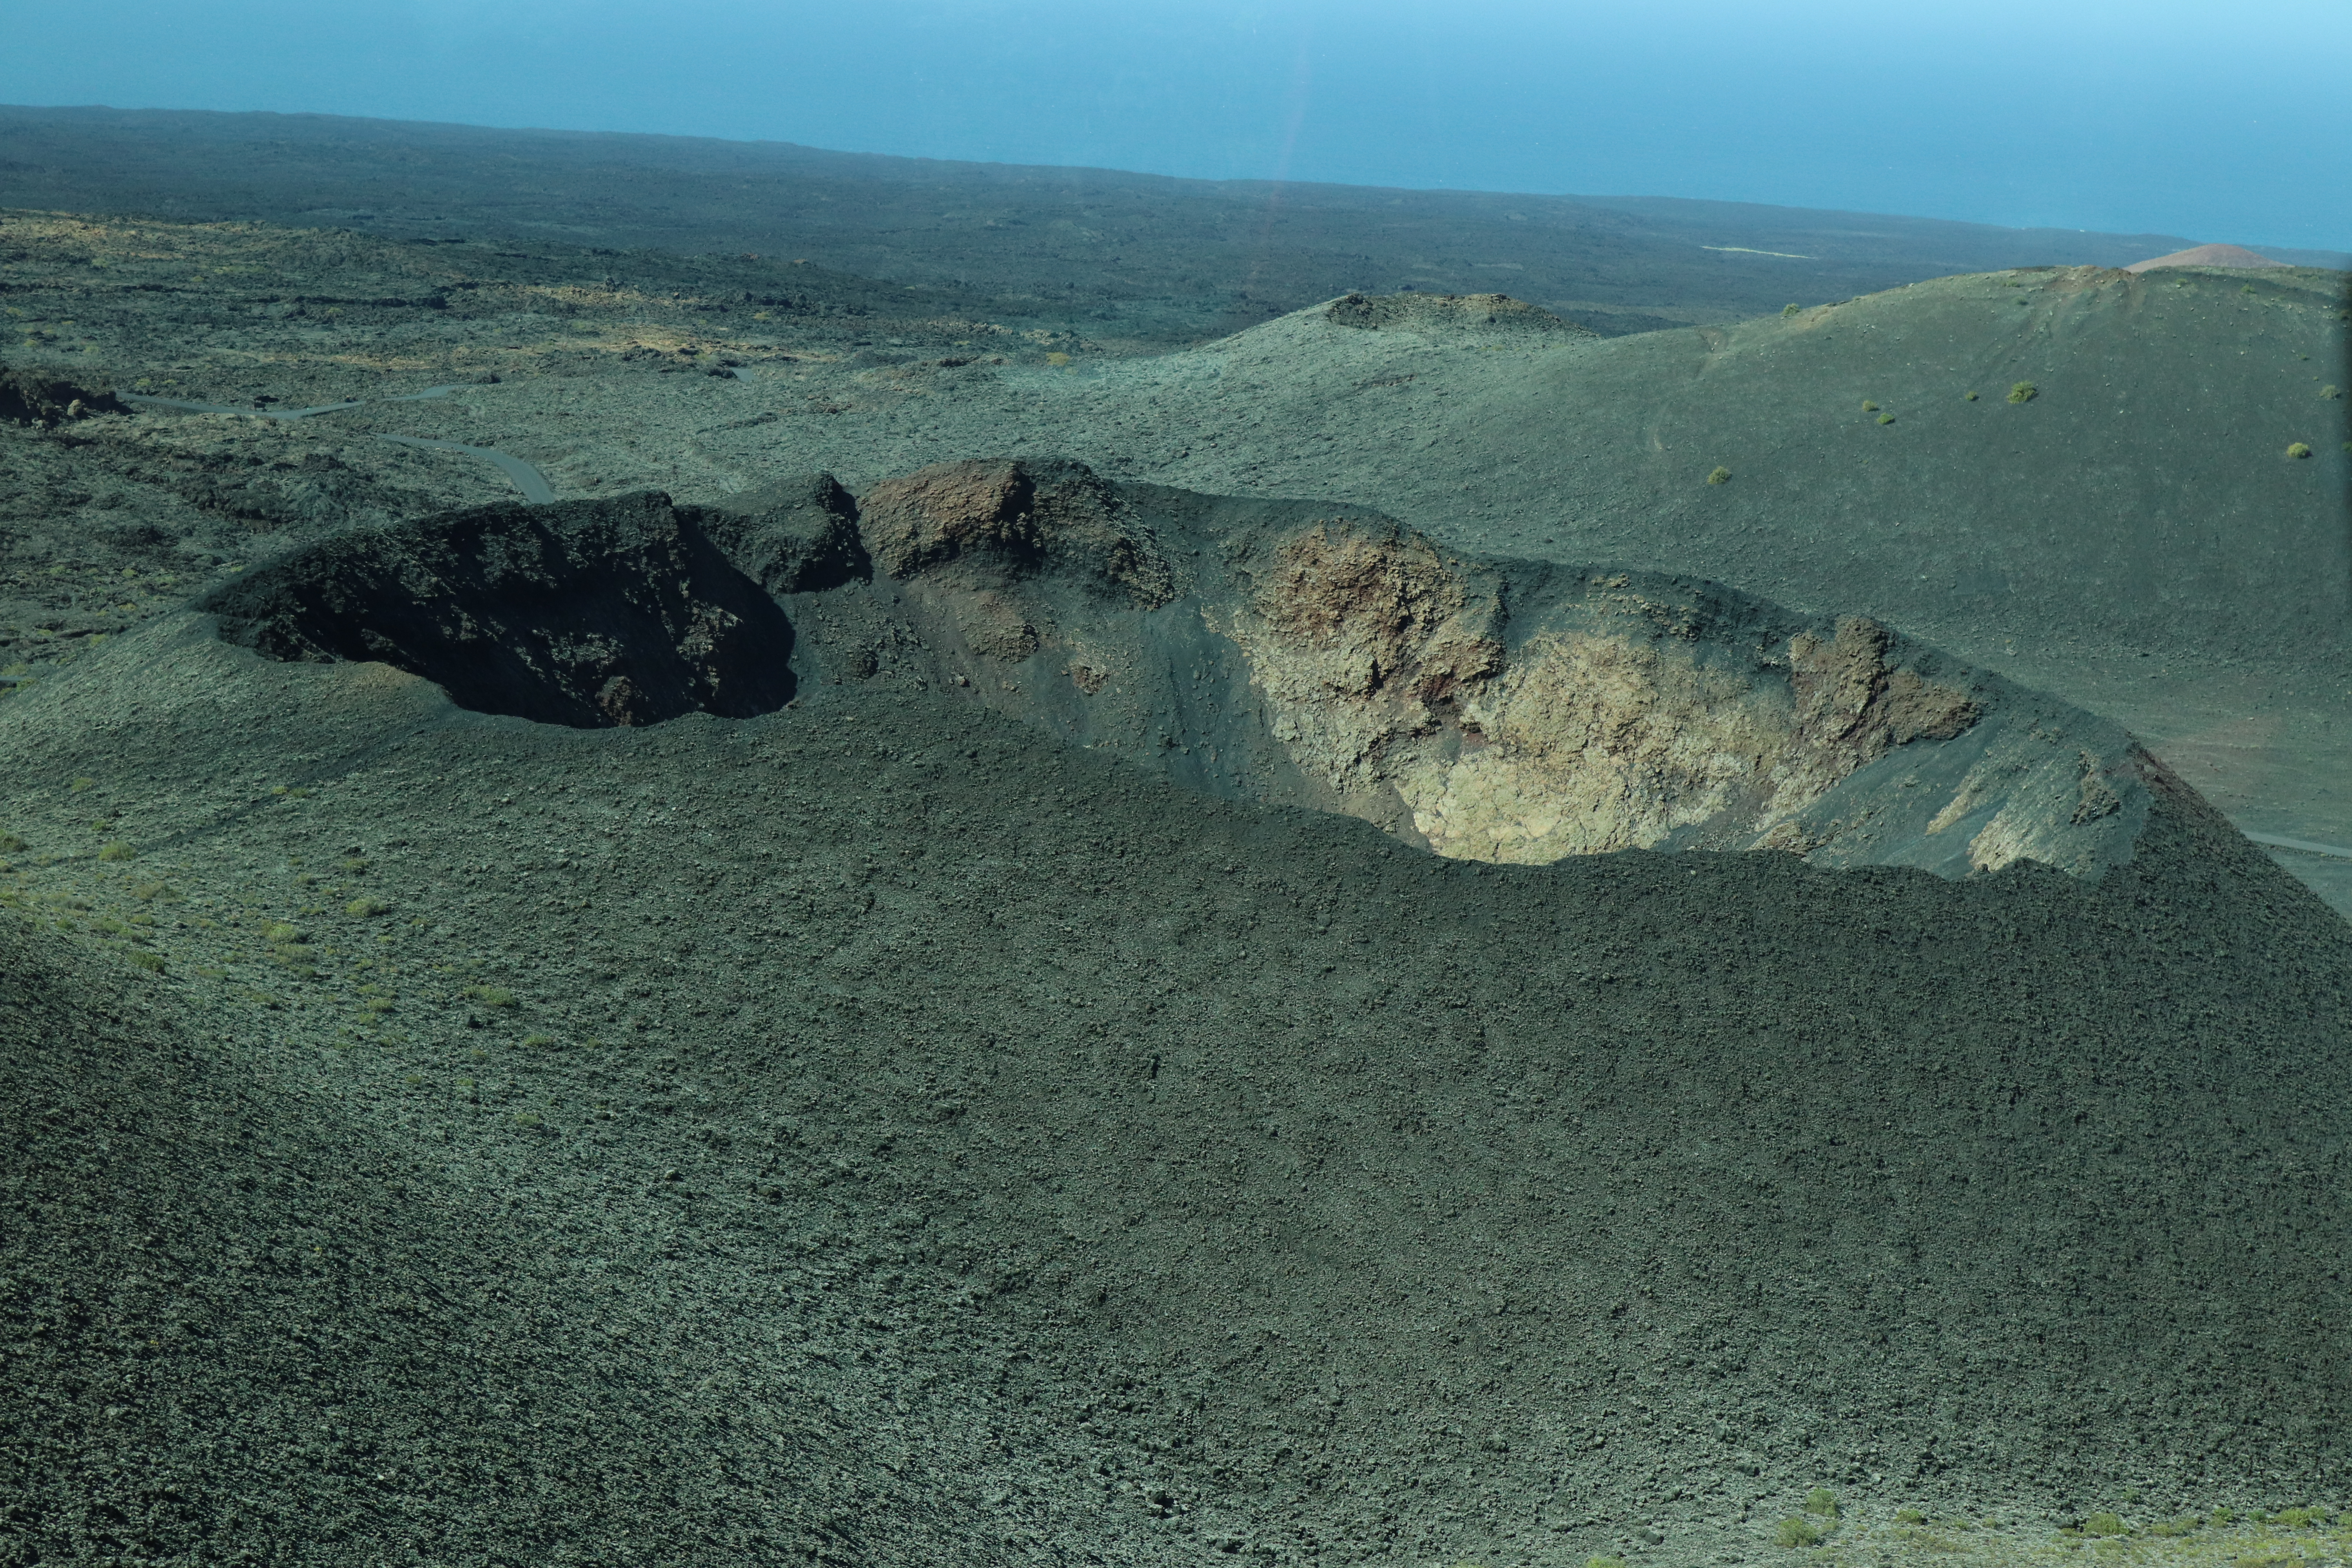  Volcanic Craters in the Timanfaya National Park